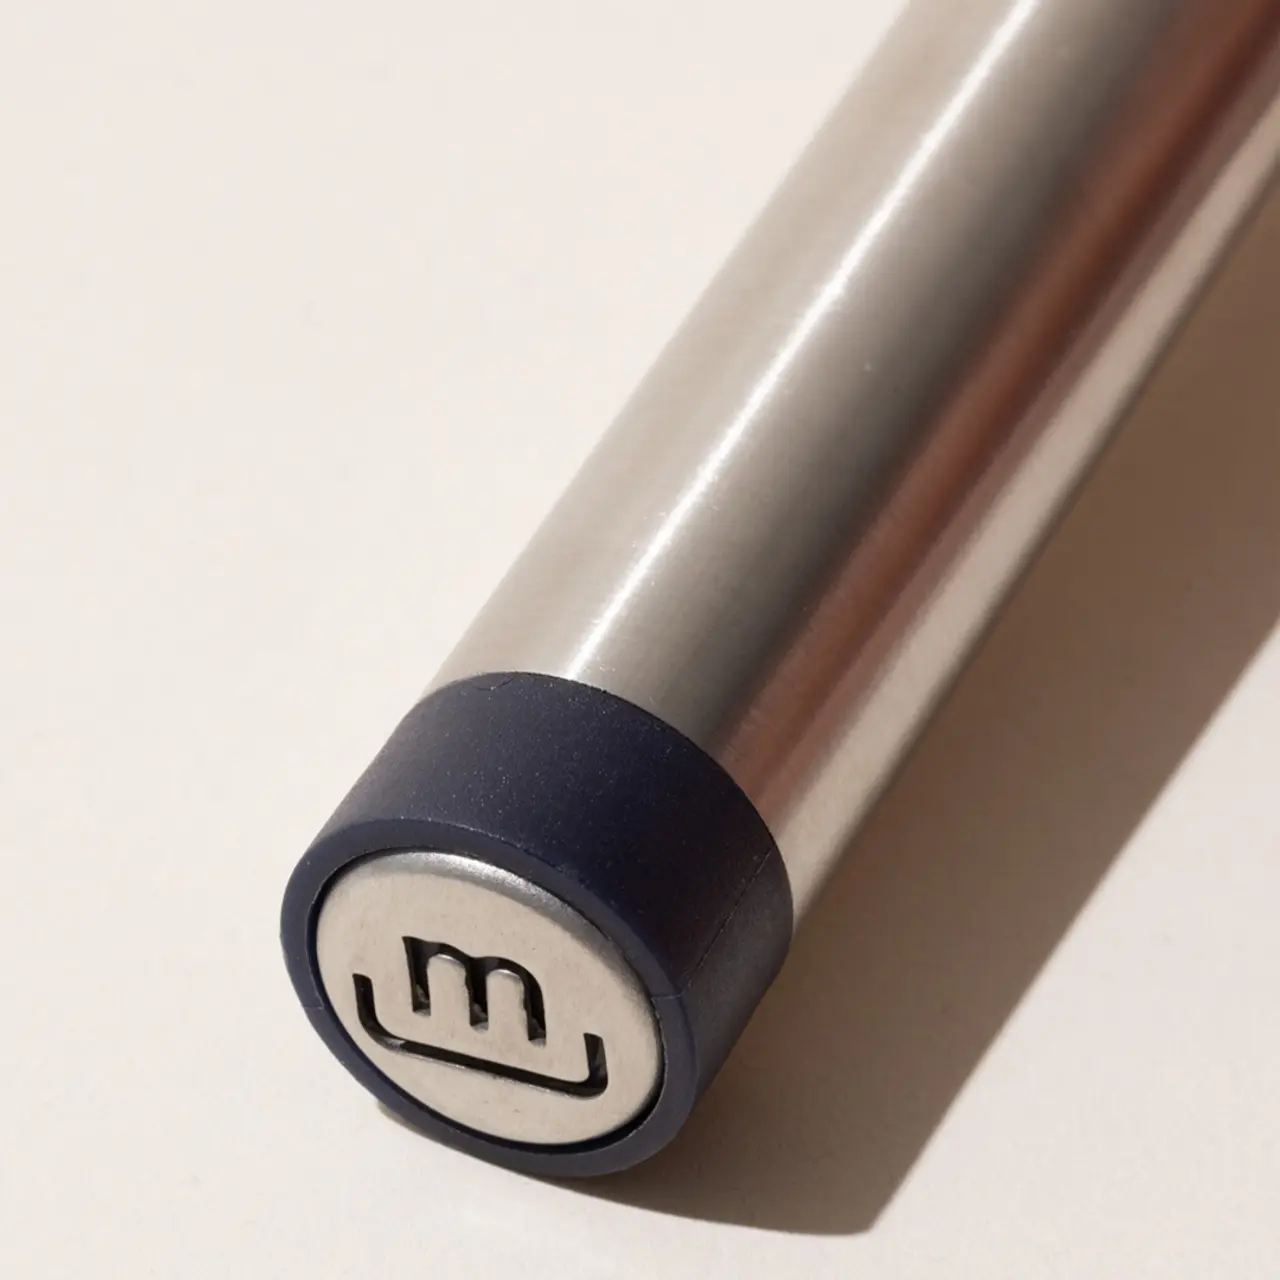 A close-up of a cylindrical metallic object with an end cap featuring a logo with the letter "M" embossed on it.